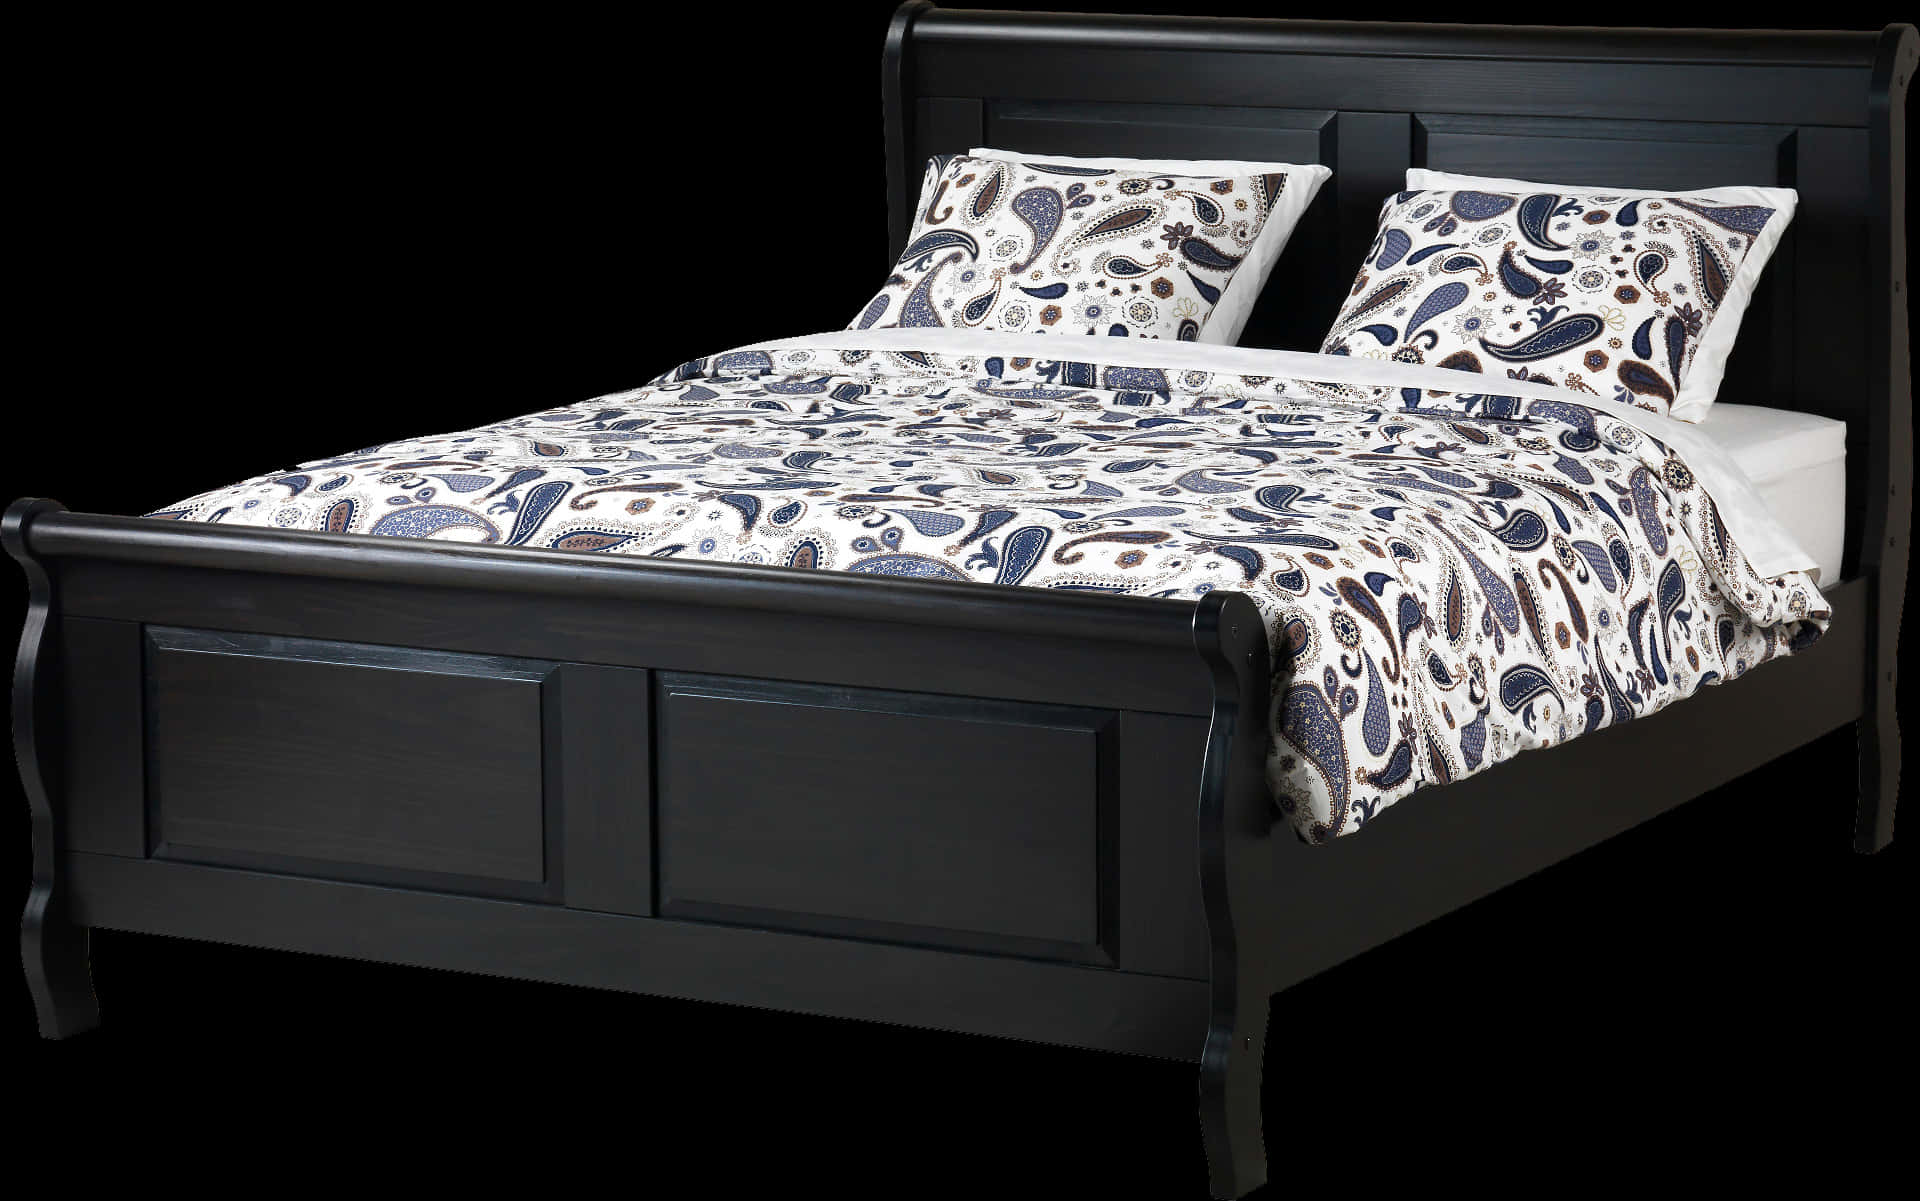 A Bed With A Black Frame